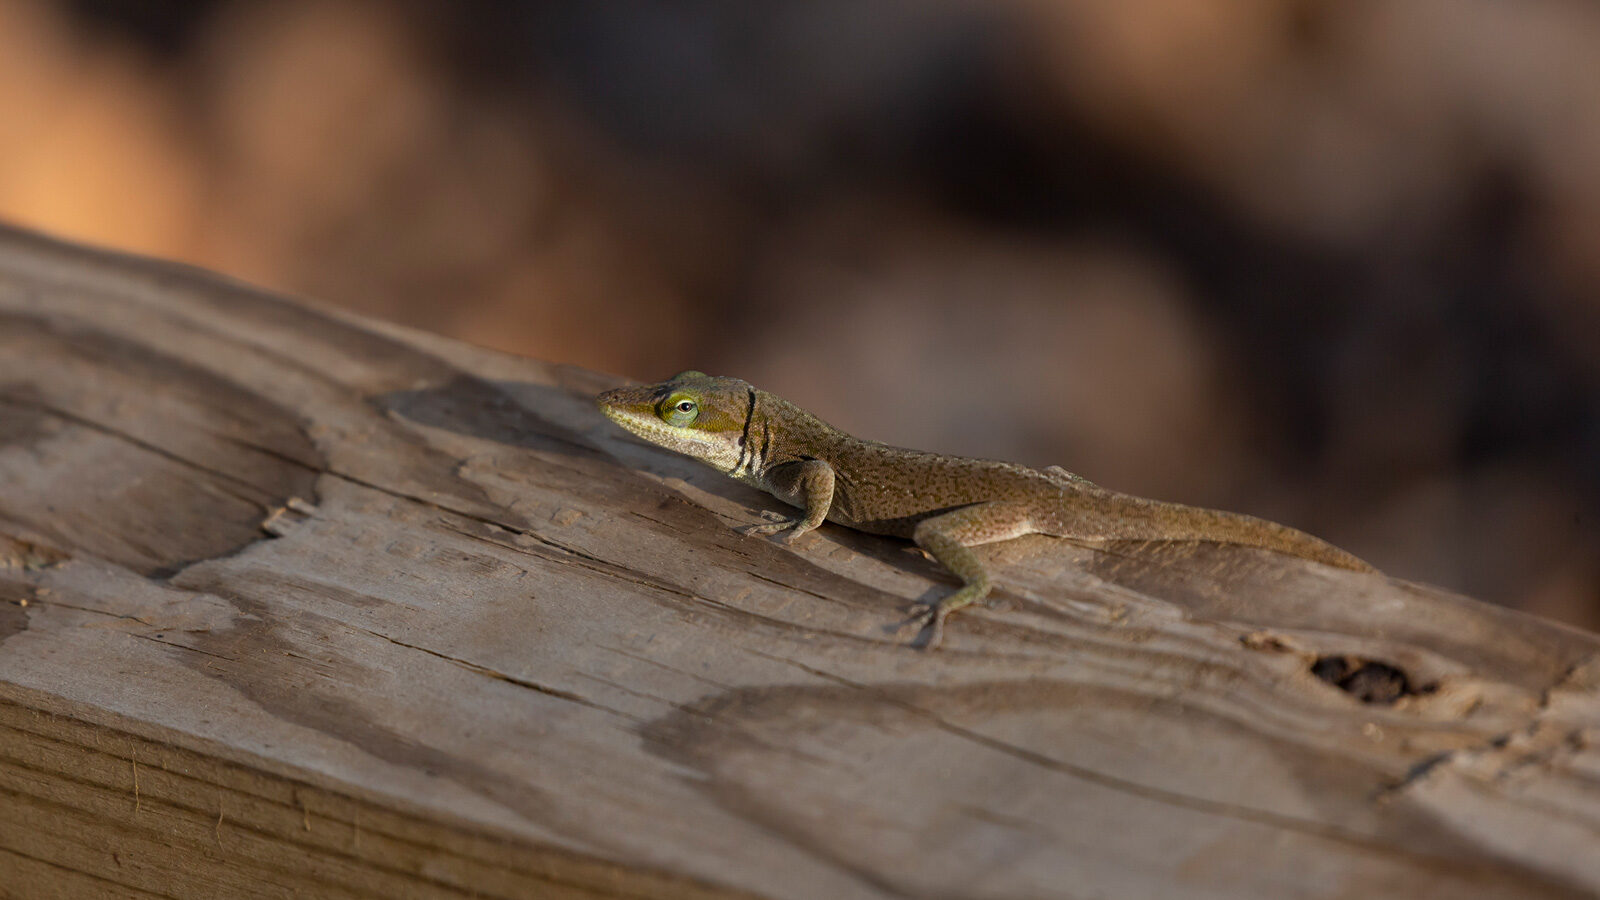 Green anole brown phase on a wooden rail